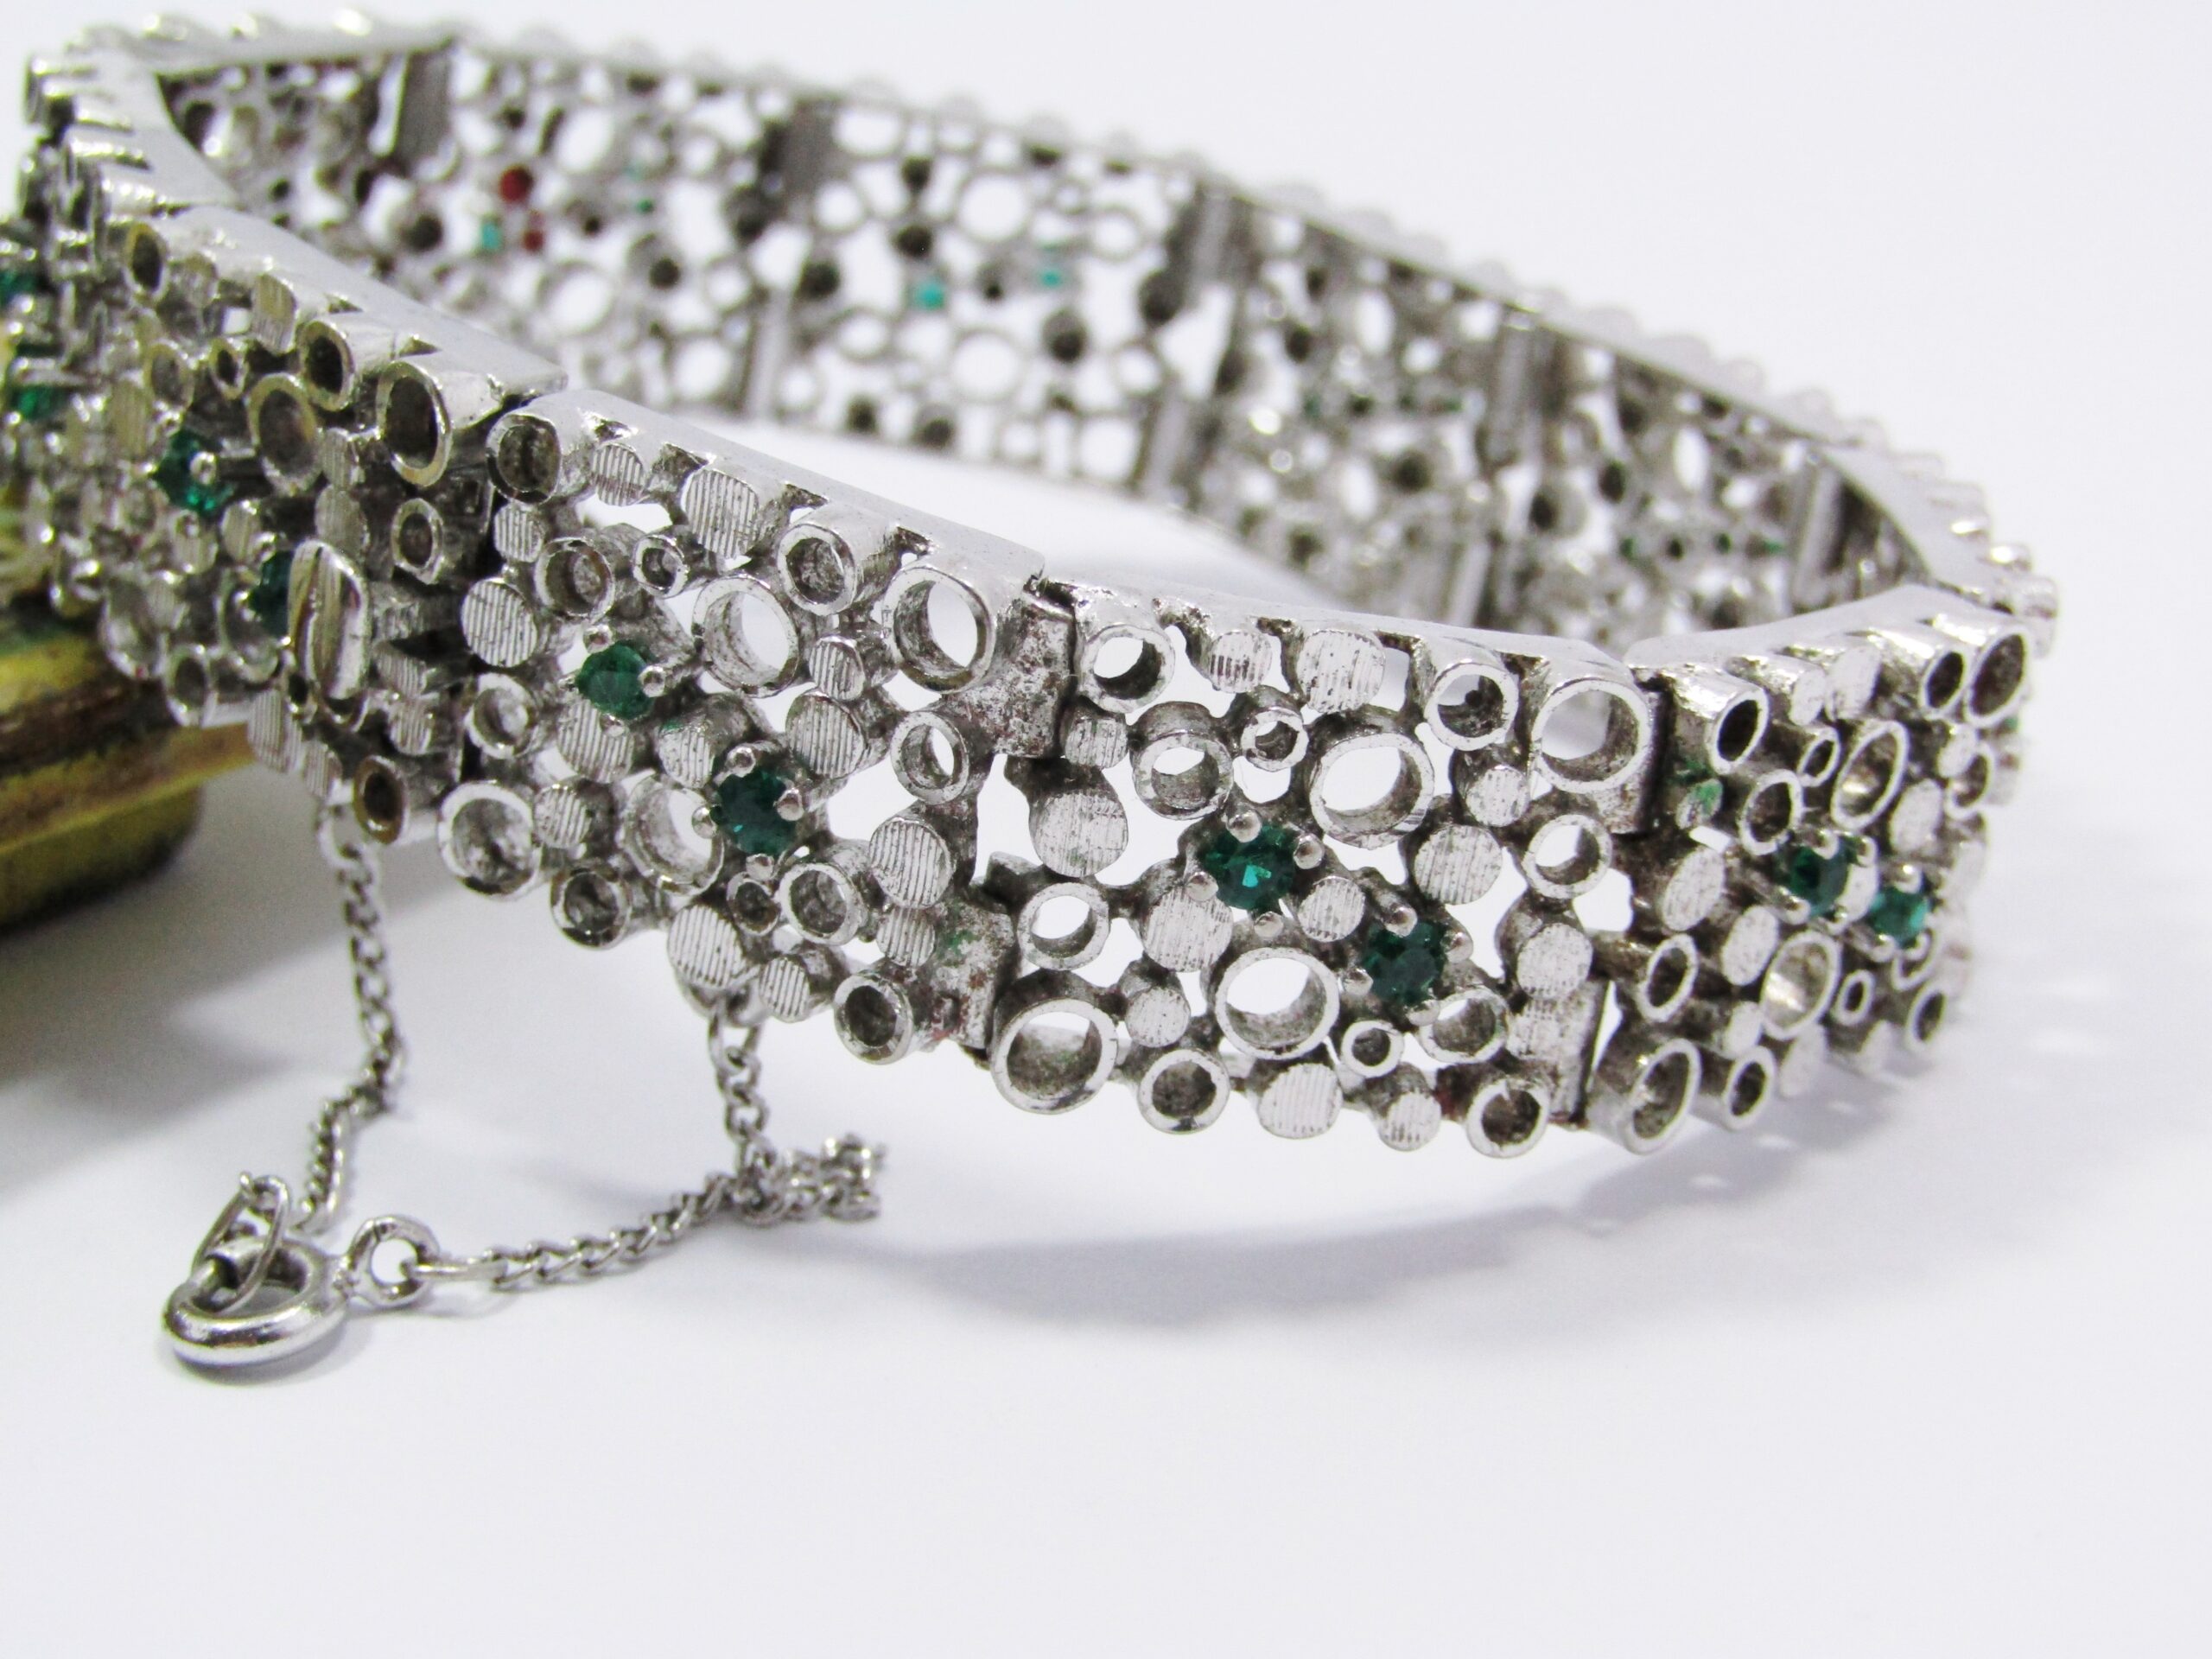 A Gorgeous Broad Paneled Bracelet Made up With Tiny Circles in Sterling Silver